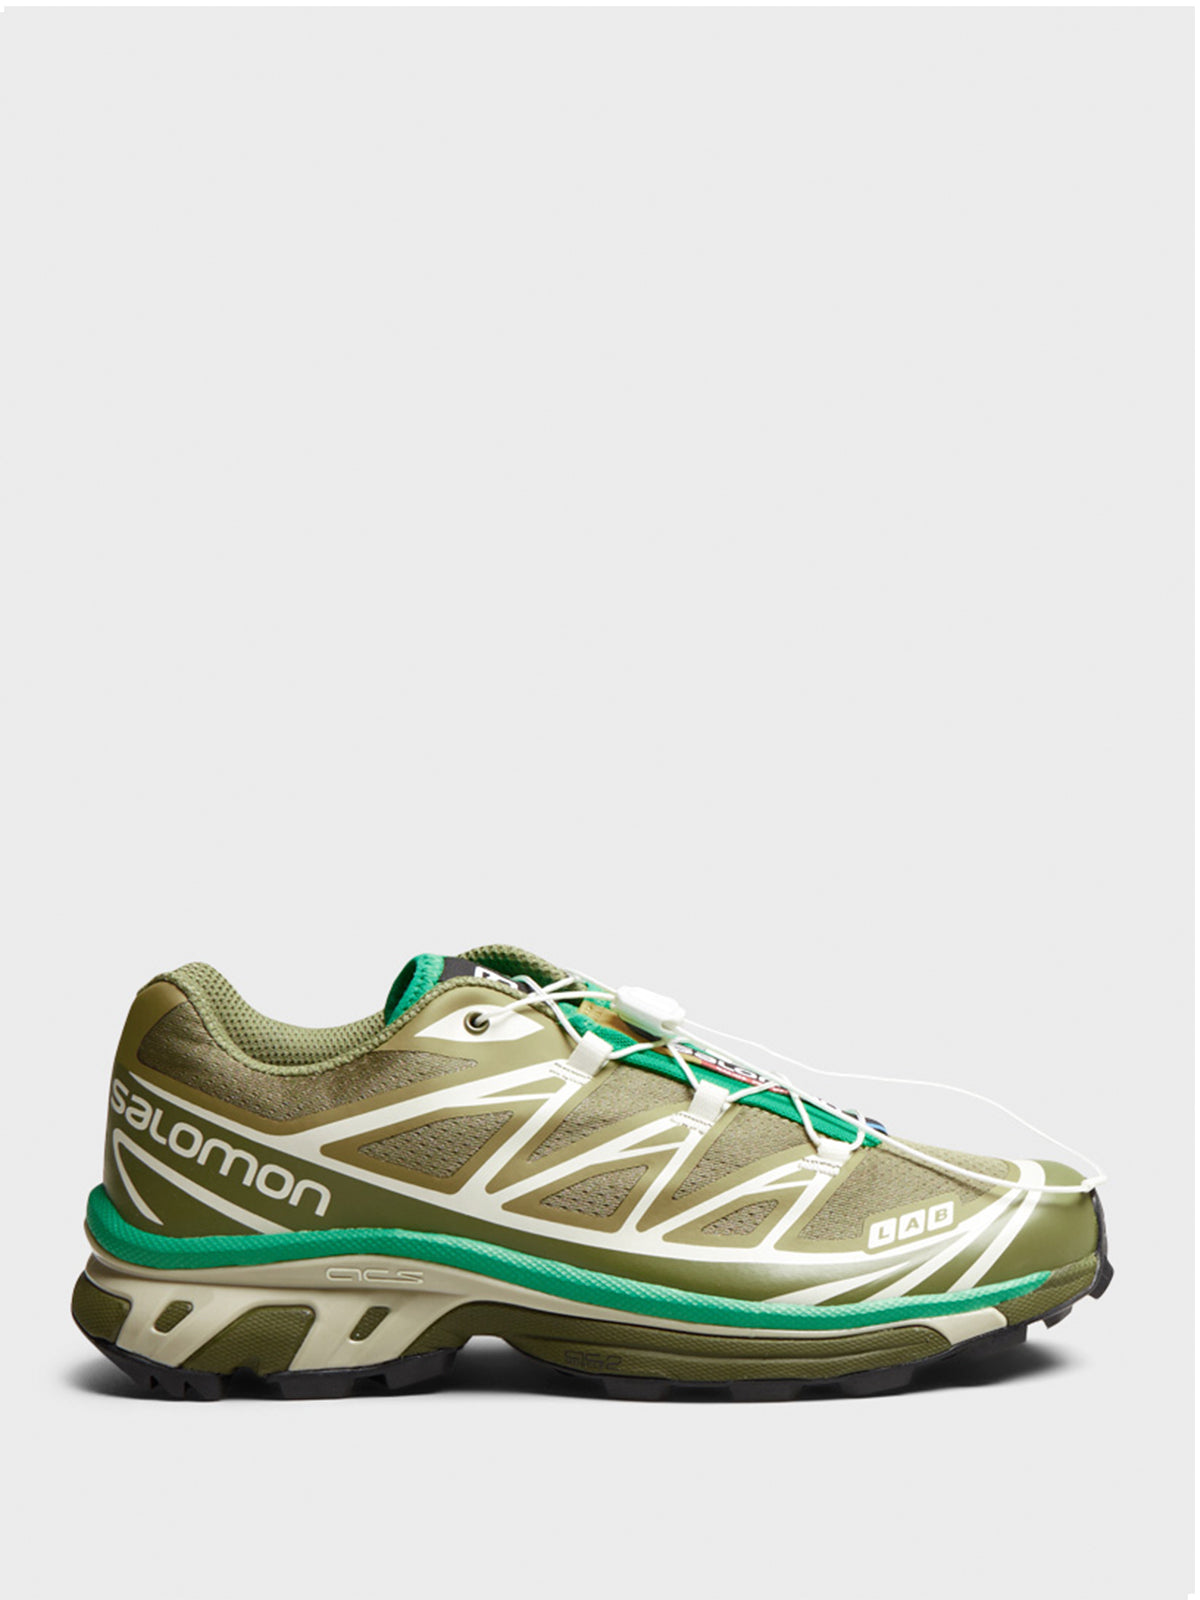 SALOMON - XT-6 Sneakers in Dried Herb, Deep Lichen Green and Bright Green